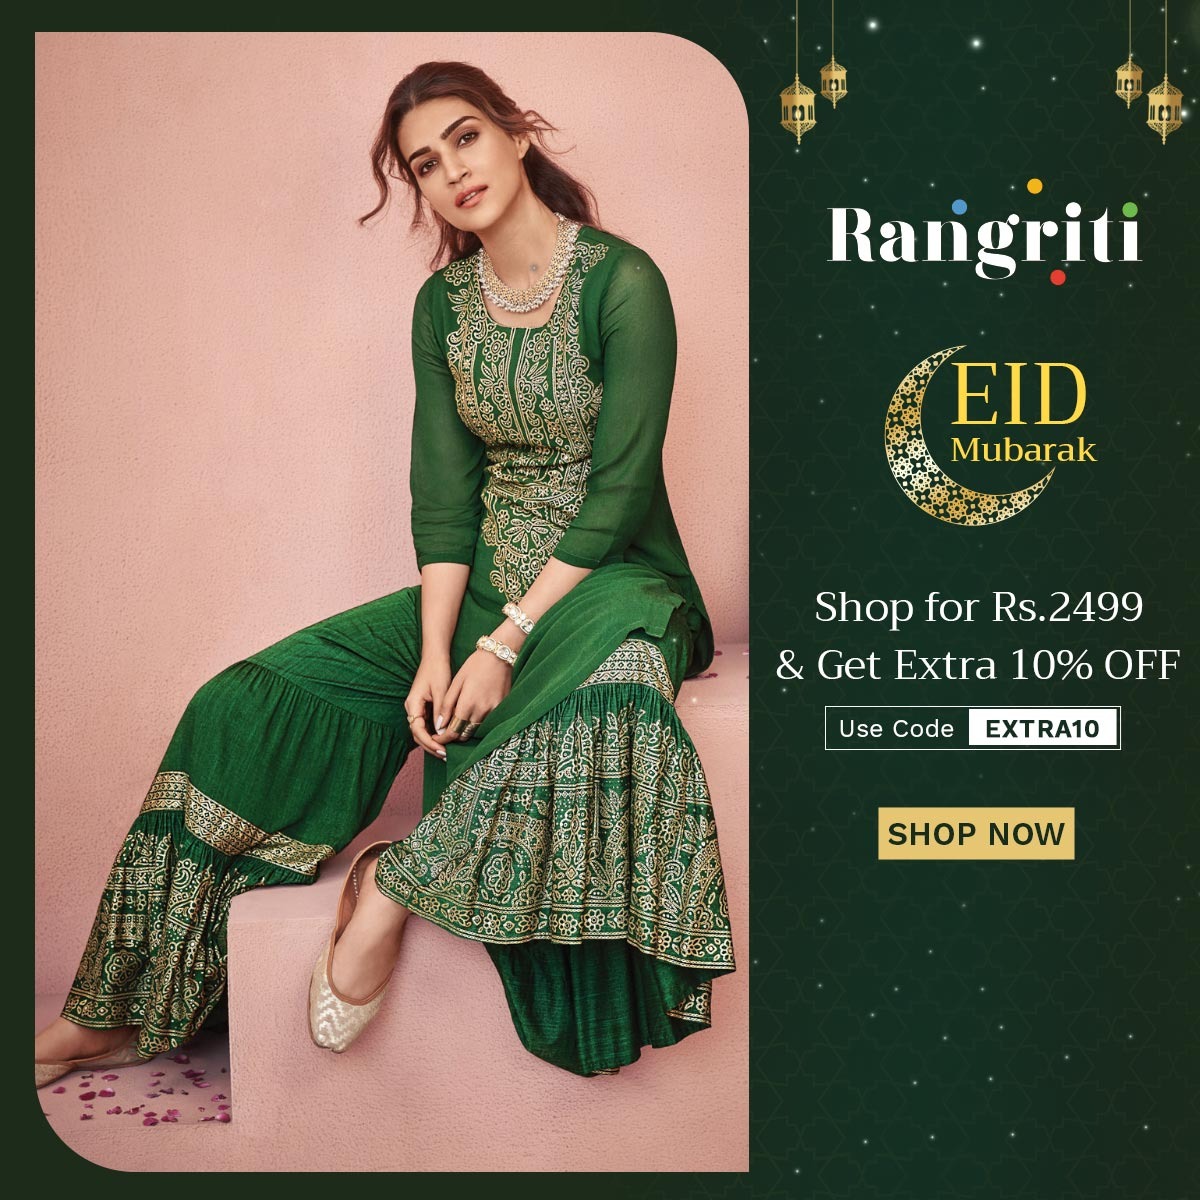 A special Eid & offer coming your way! 🌙

Search 17002 & 17042 on our website to shop the featured look. ✨

#Rangriti #ThodaIndieThodaMe #KritiForRangriti #KritiSanon #Offer #EidOffer #EidShopping #Eid2023 #Fusion #ethnicwear #traditionalwear #indowesternwear